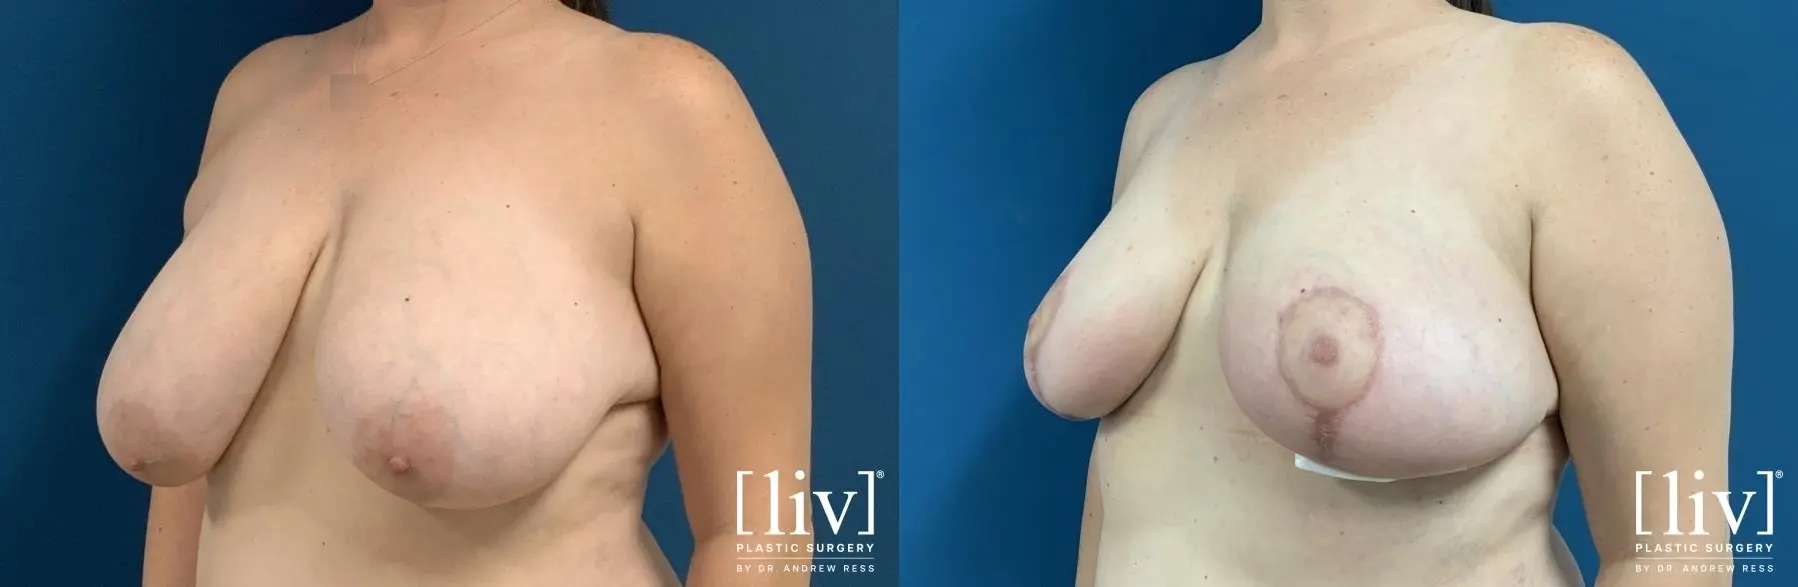 Breast Reduction: Patient 3 - Before and After 2